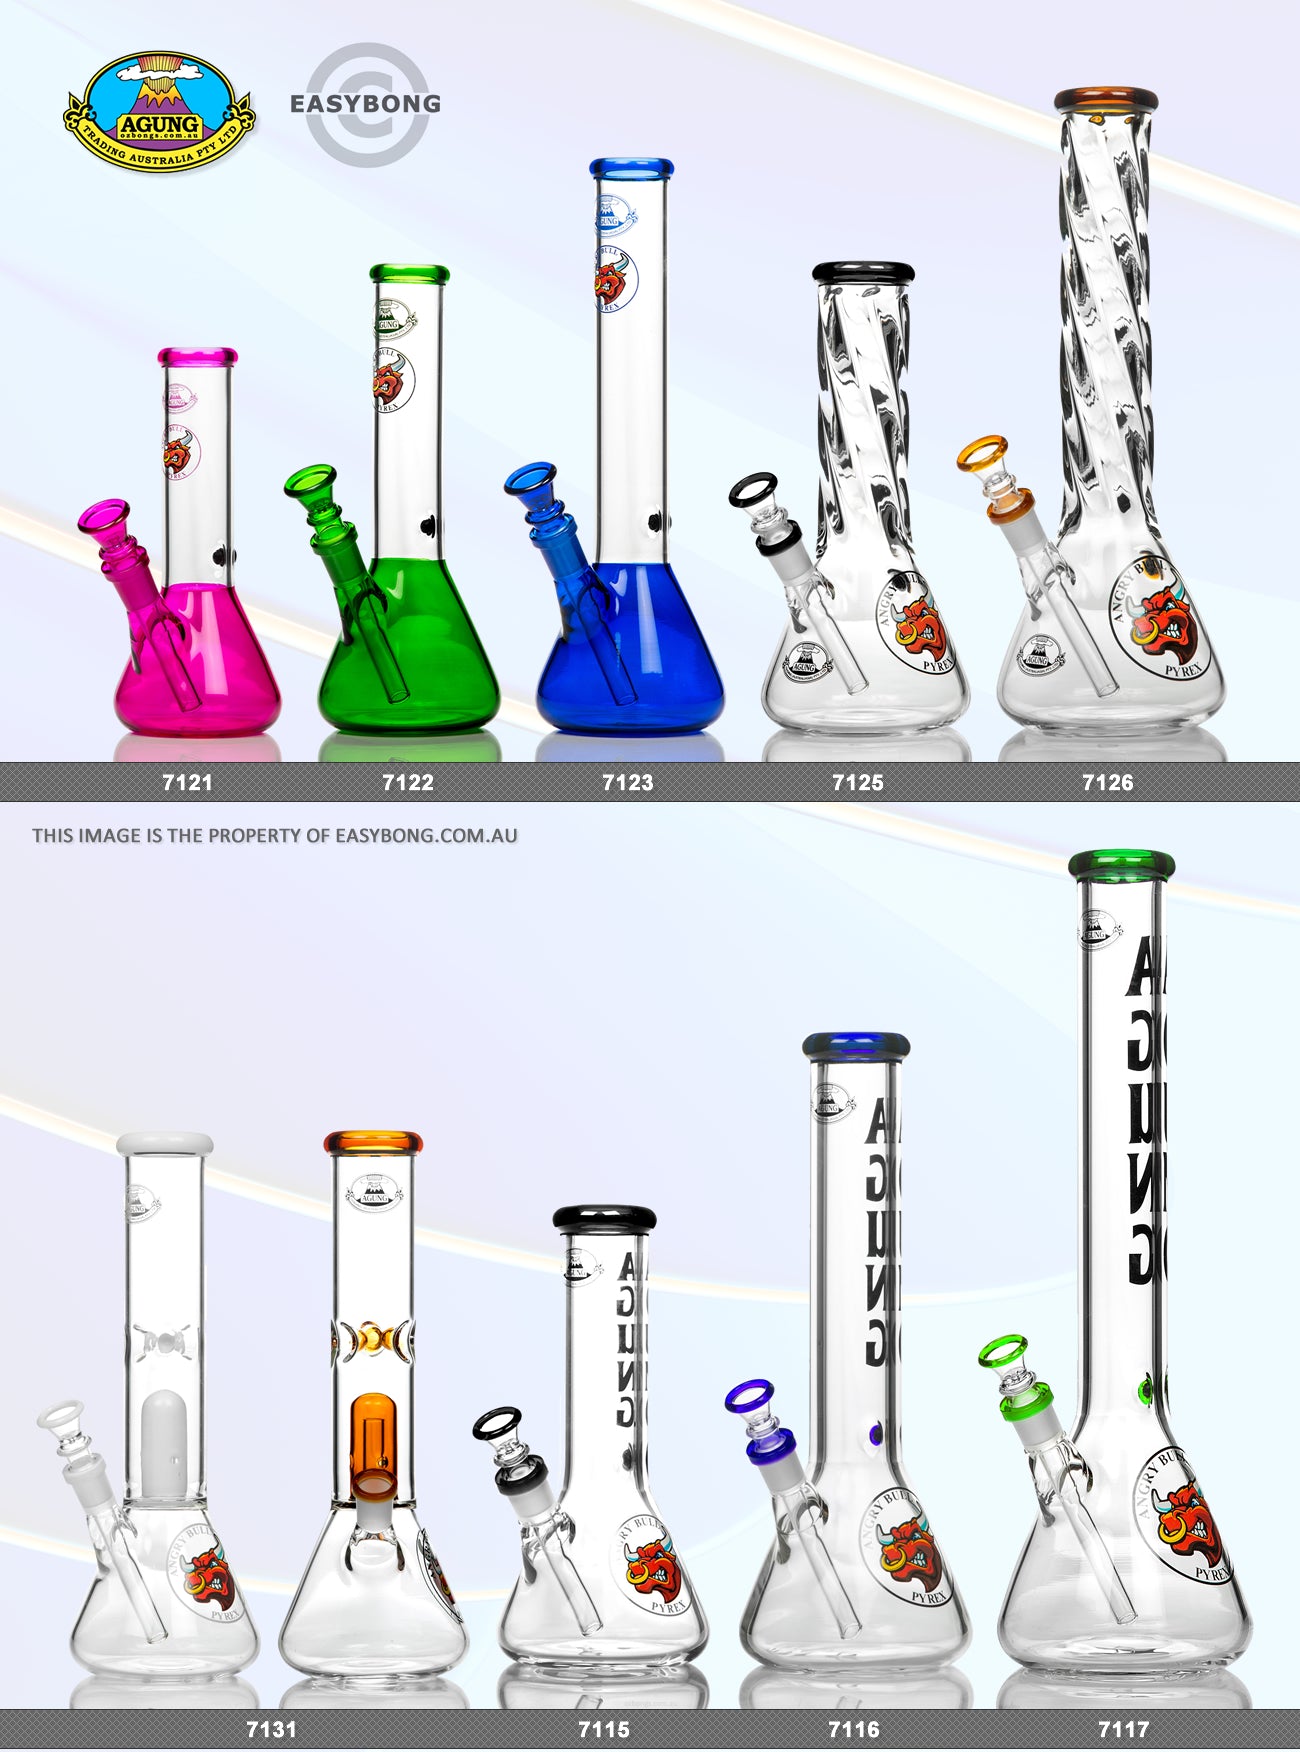 Agung glass beaker bongs in various sizes from small to large.